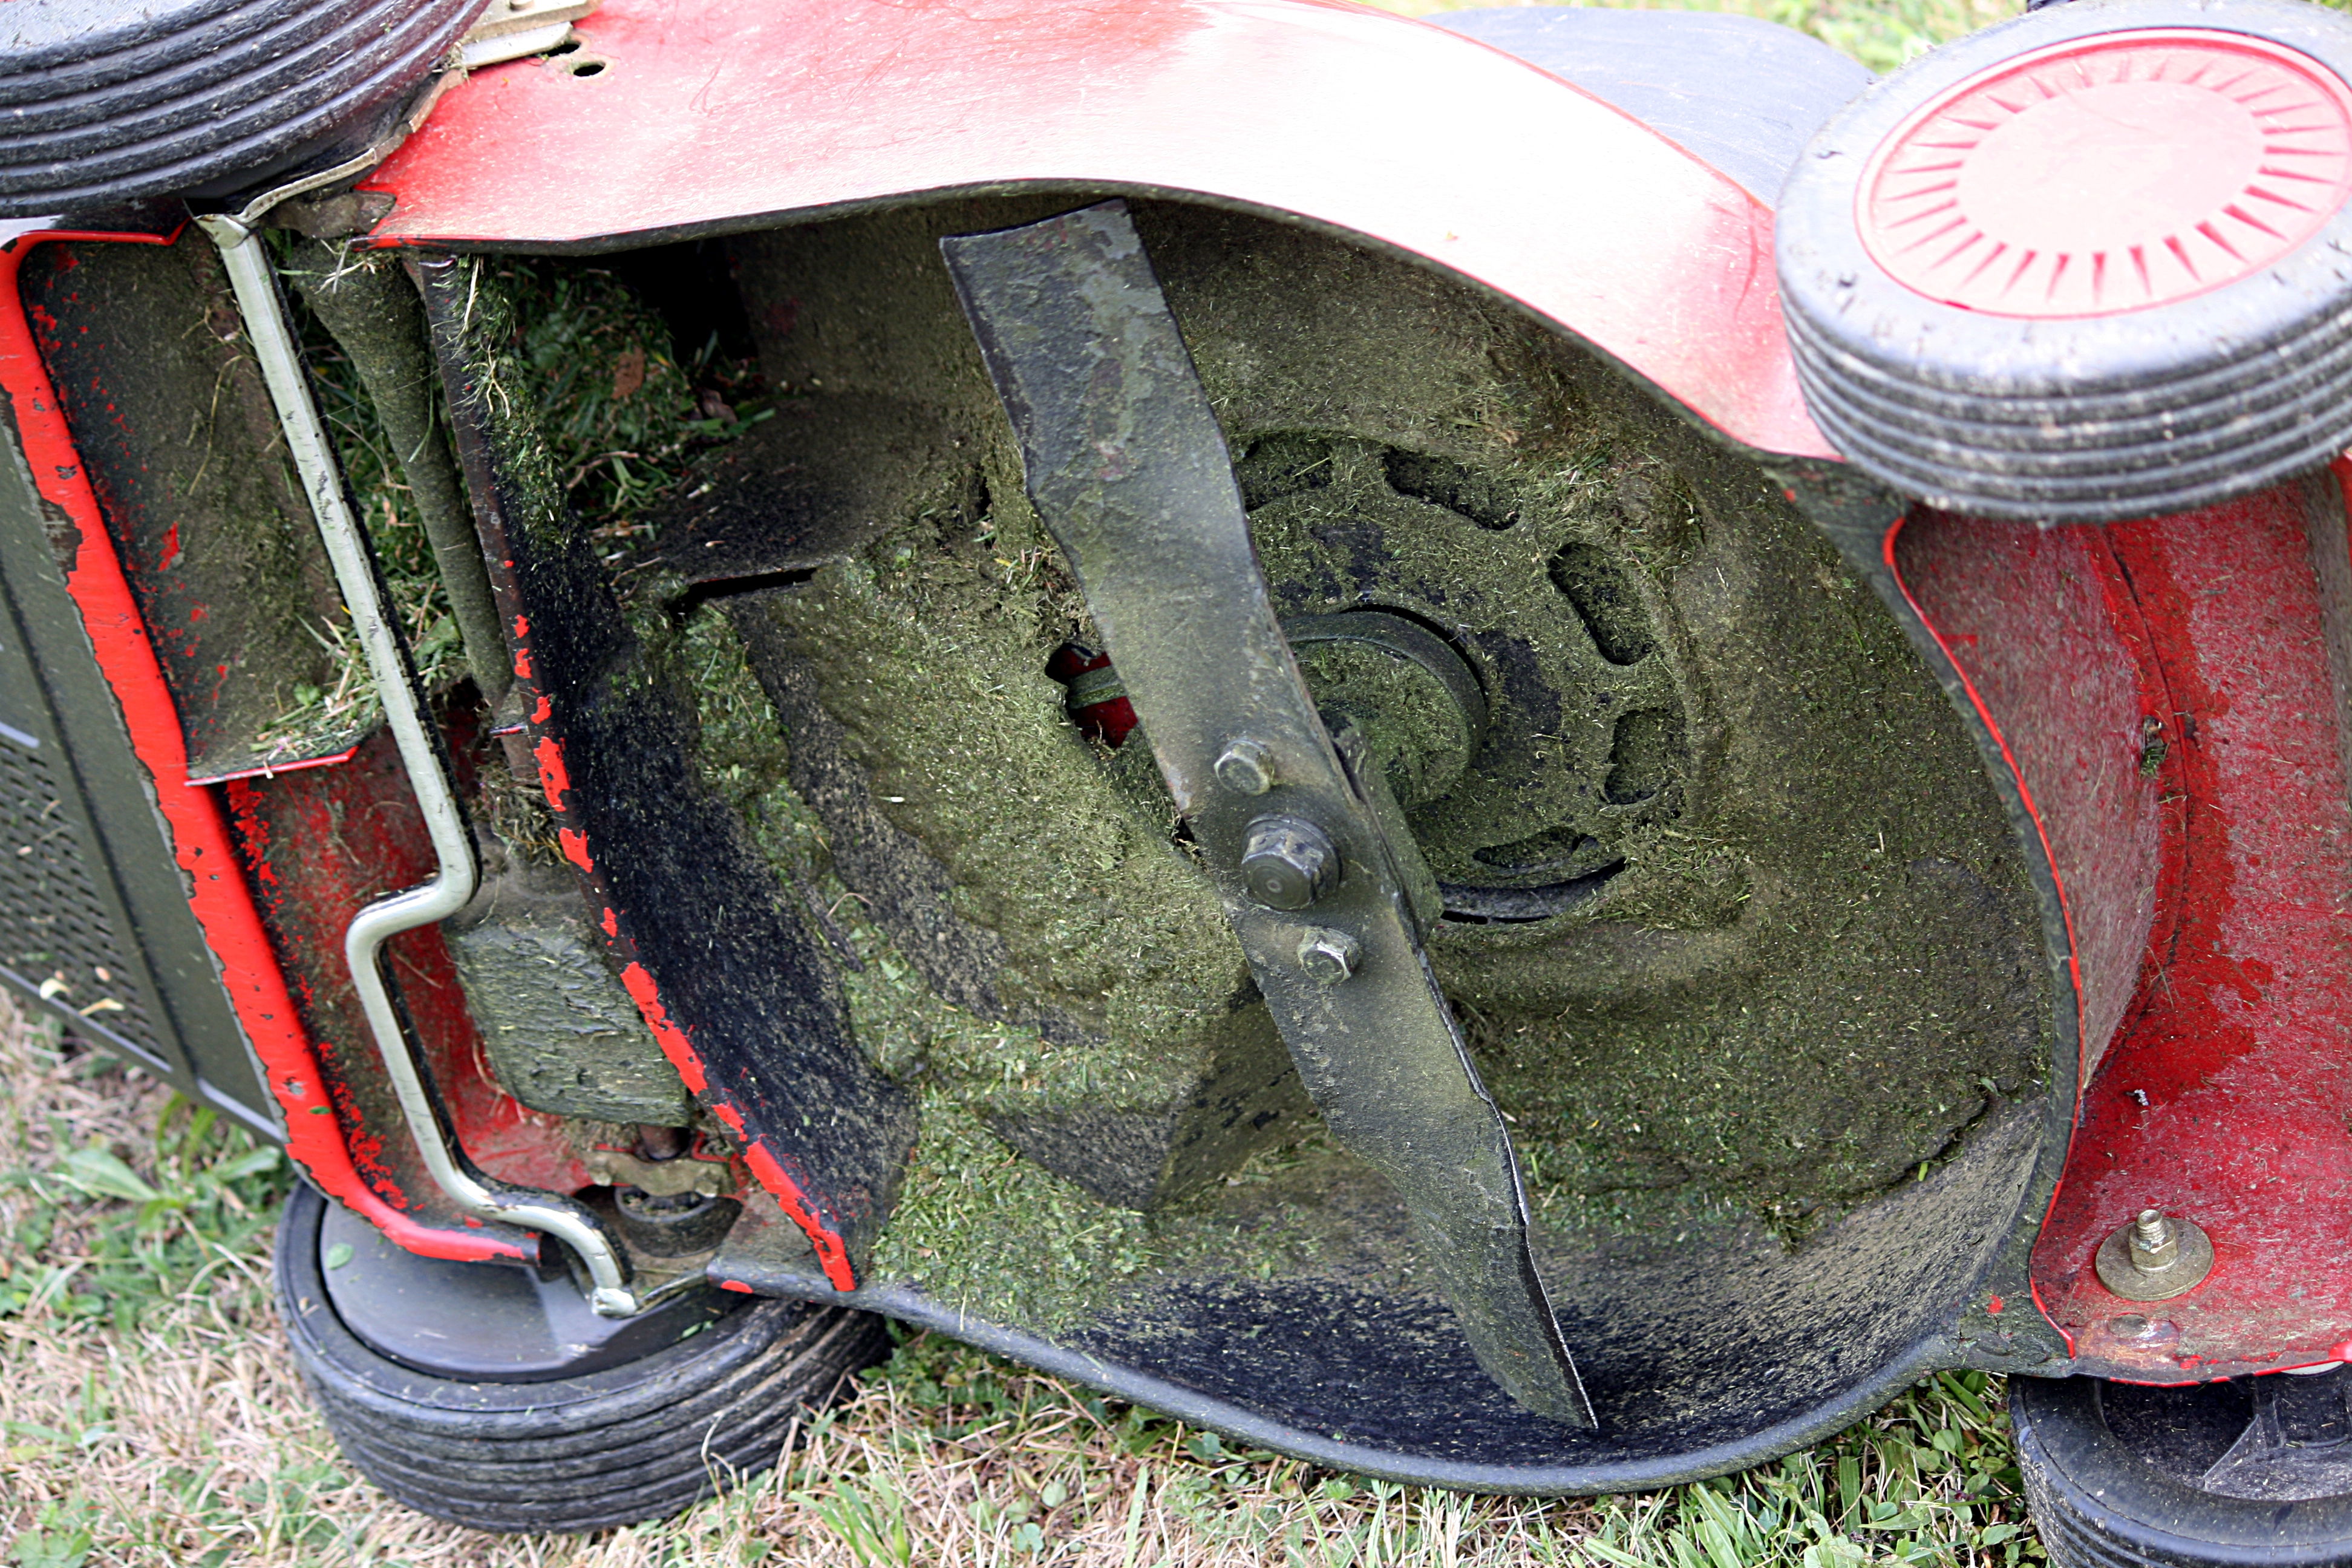 how to remove a lawn mower blade